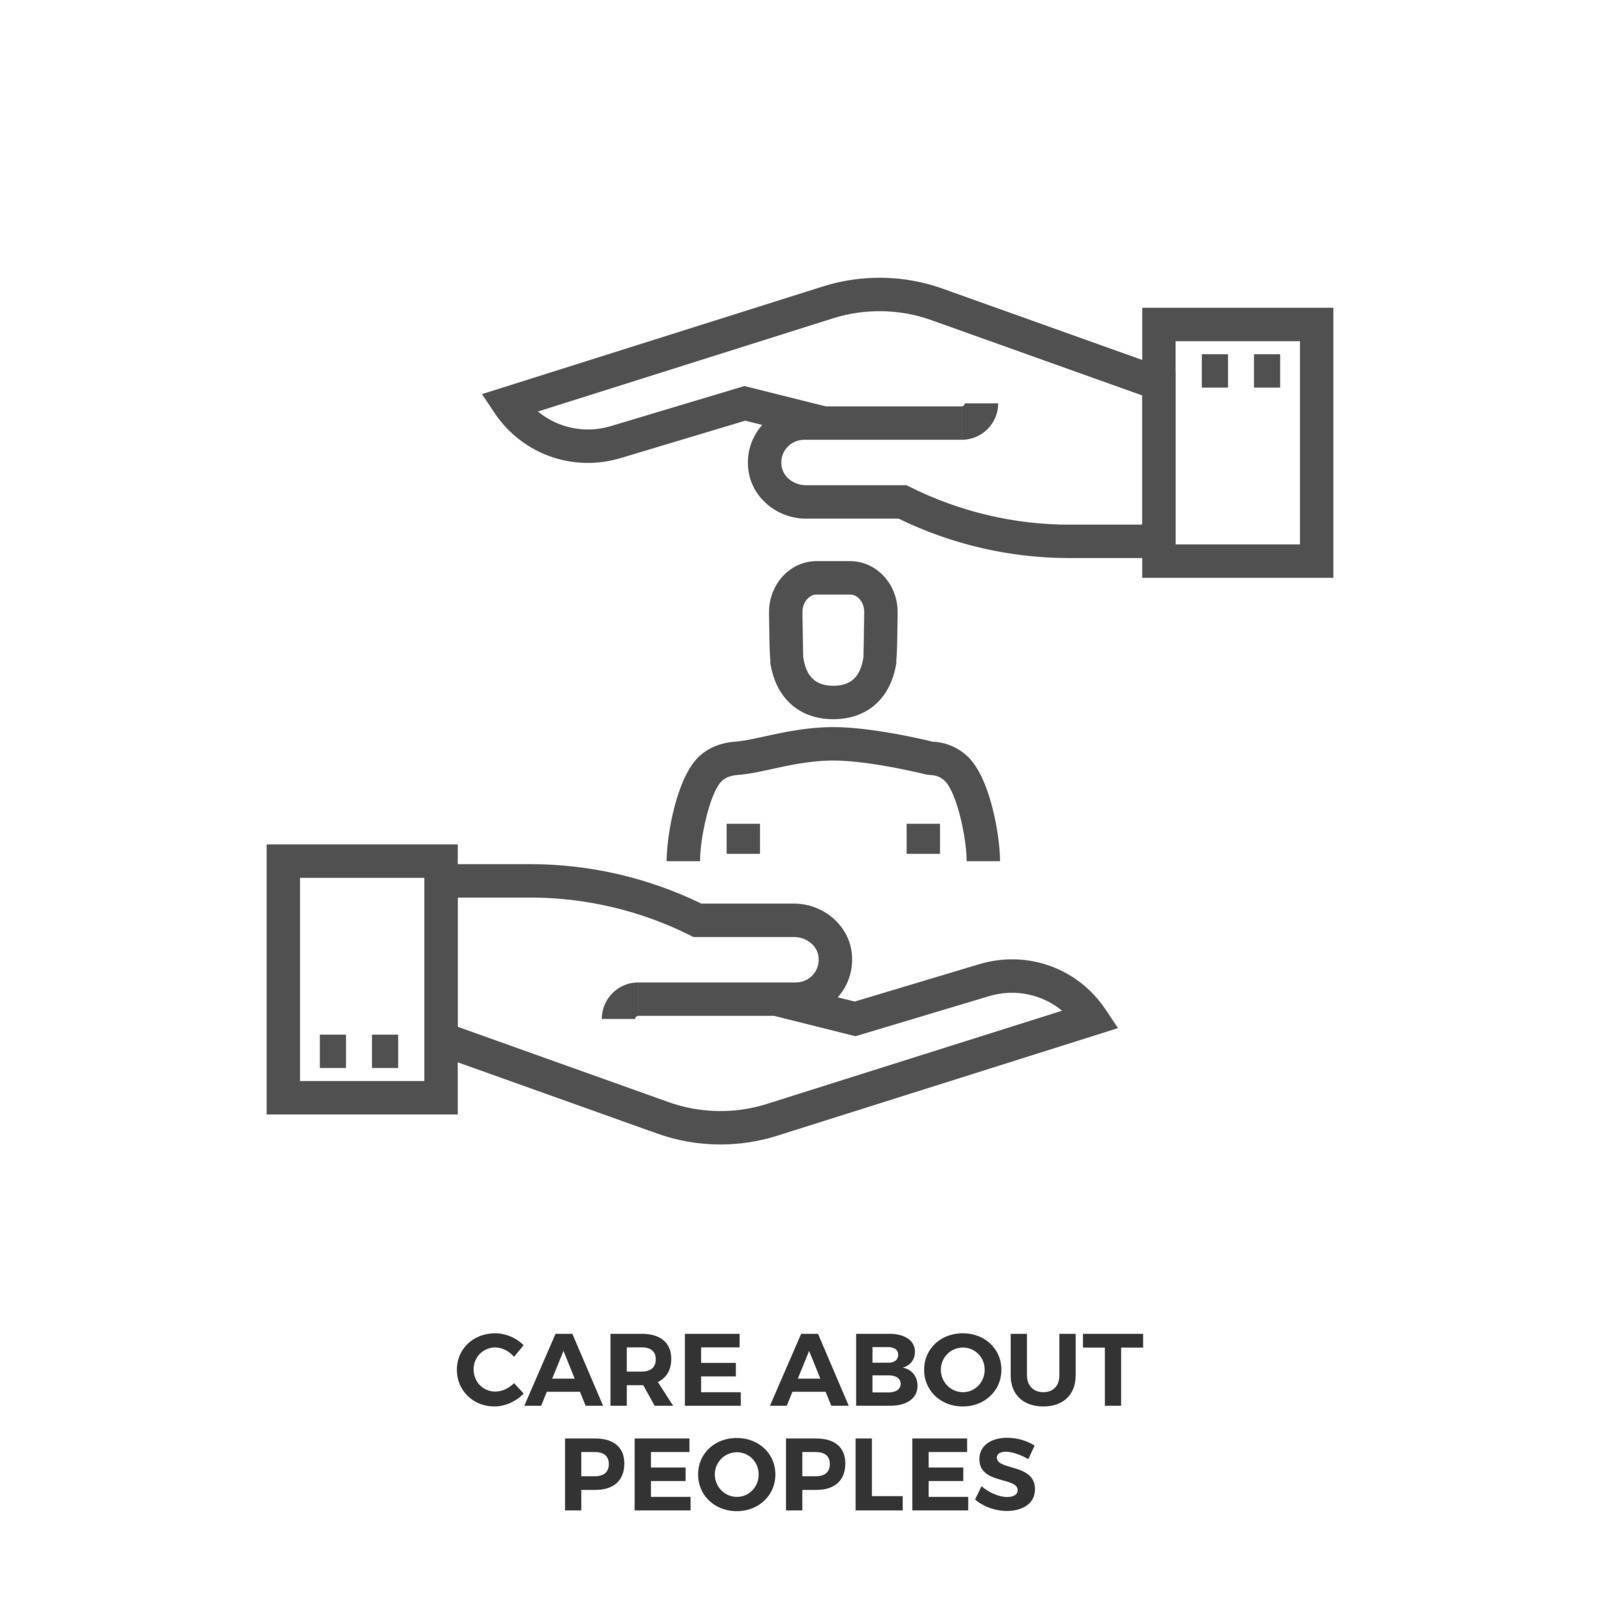 Care About Peoples Thin Line Vector Icon Isolated on the White Background.